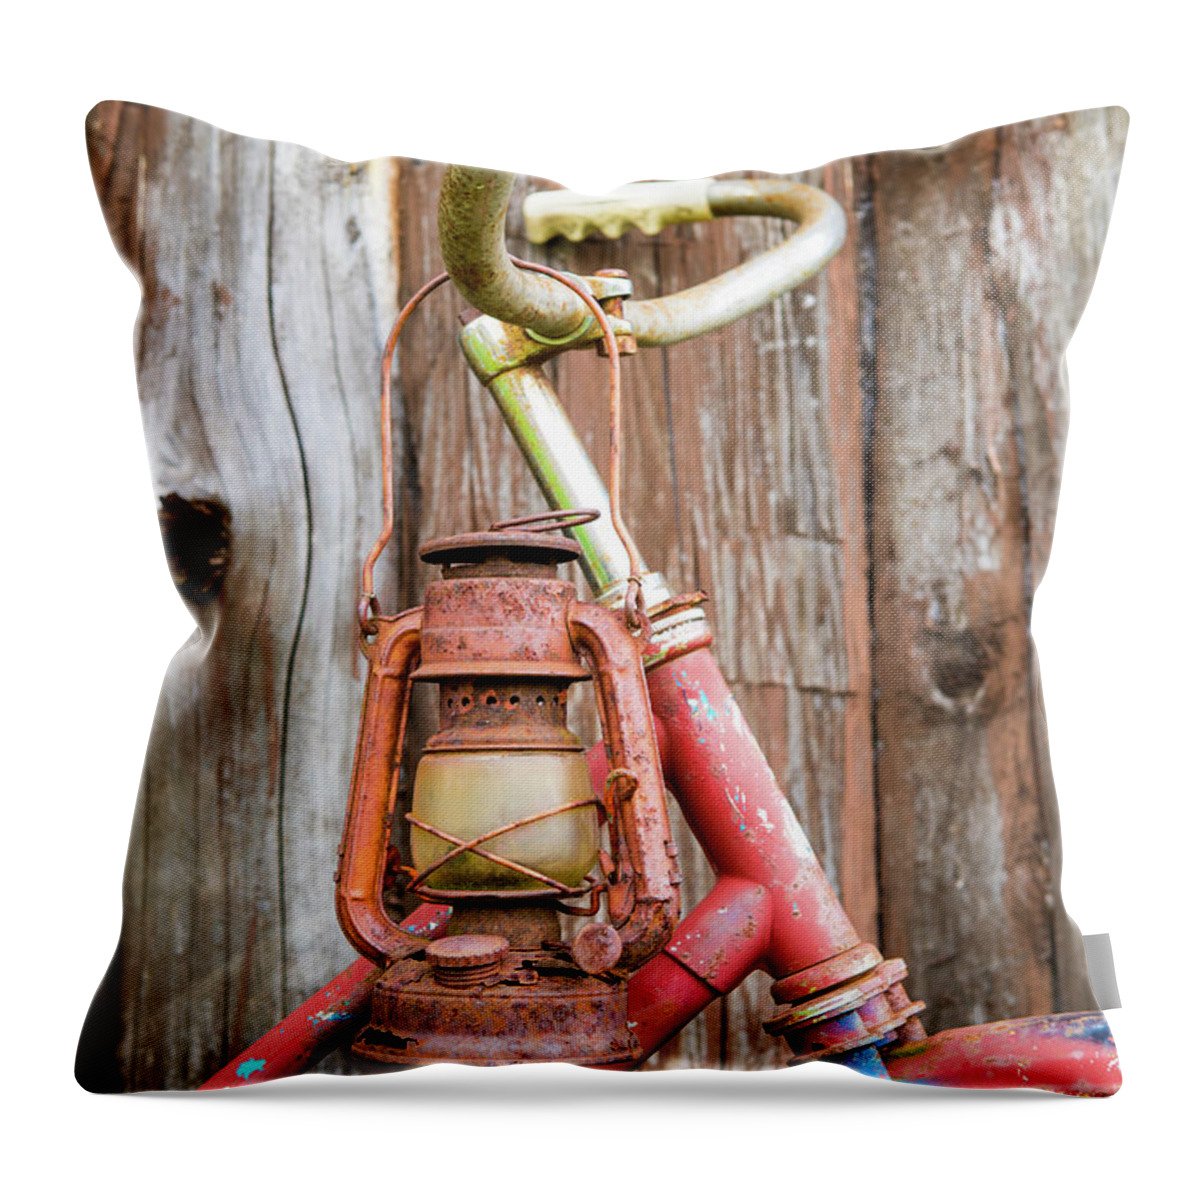 Aberfoyle Market Throw Pillow featuring the photograph Vintage Bicycle by Nick Mares